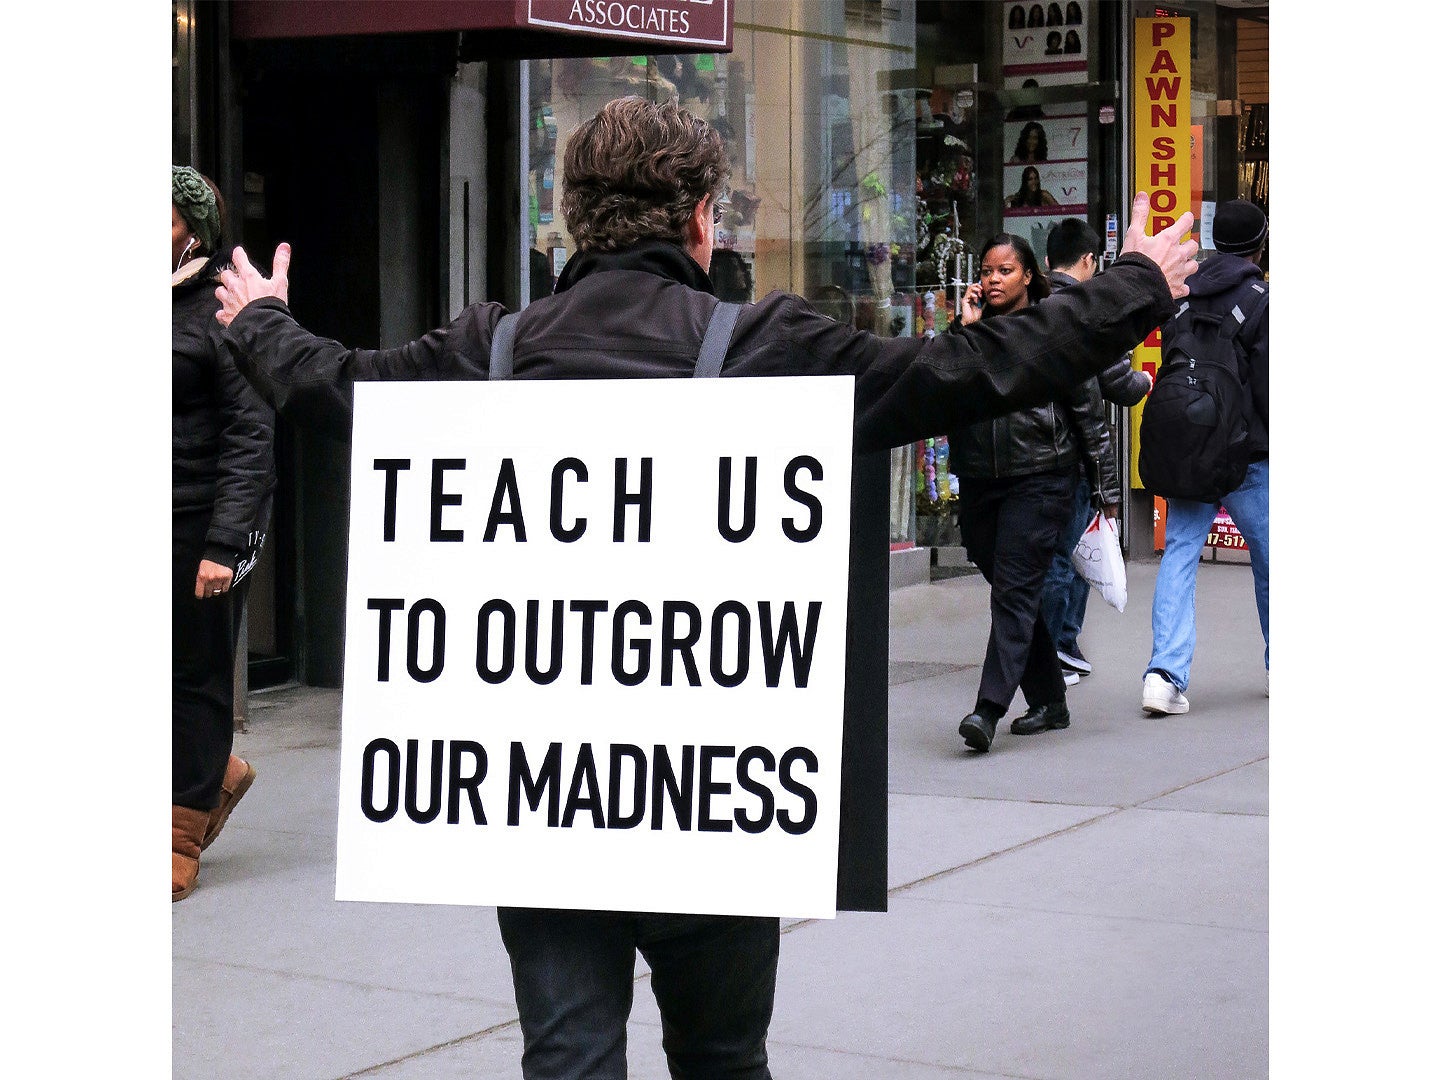 Image from Alfredo Jaar, titled "Teach Us to Outgrow Our Madness", 2018. Shows a man with a sandwich board on a city sidewalk with his back facing the camera. 